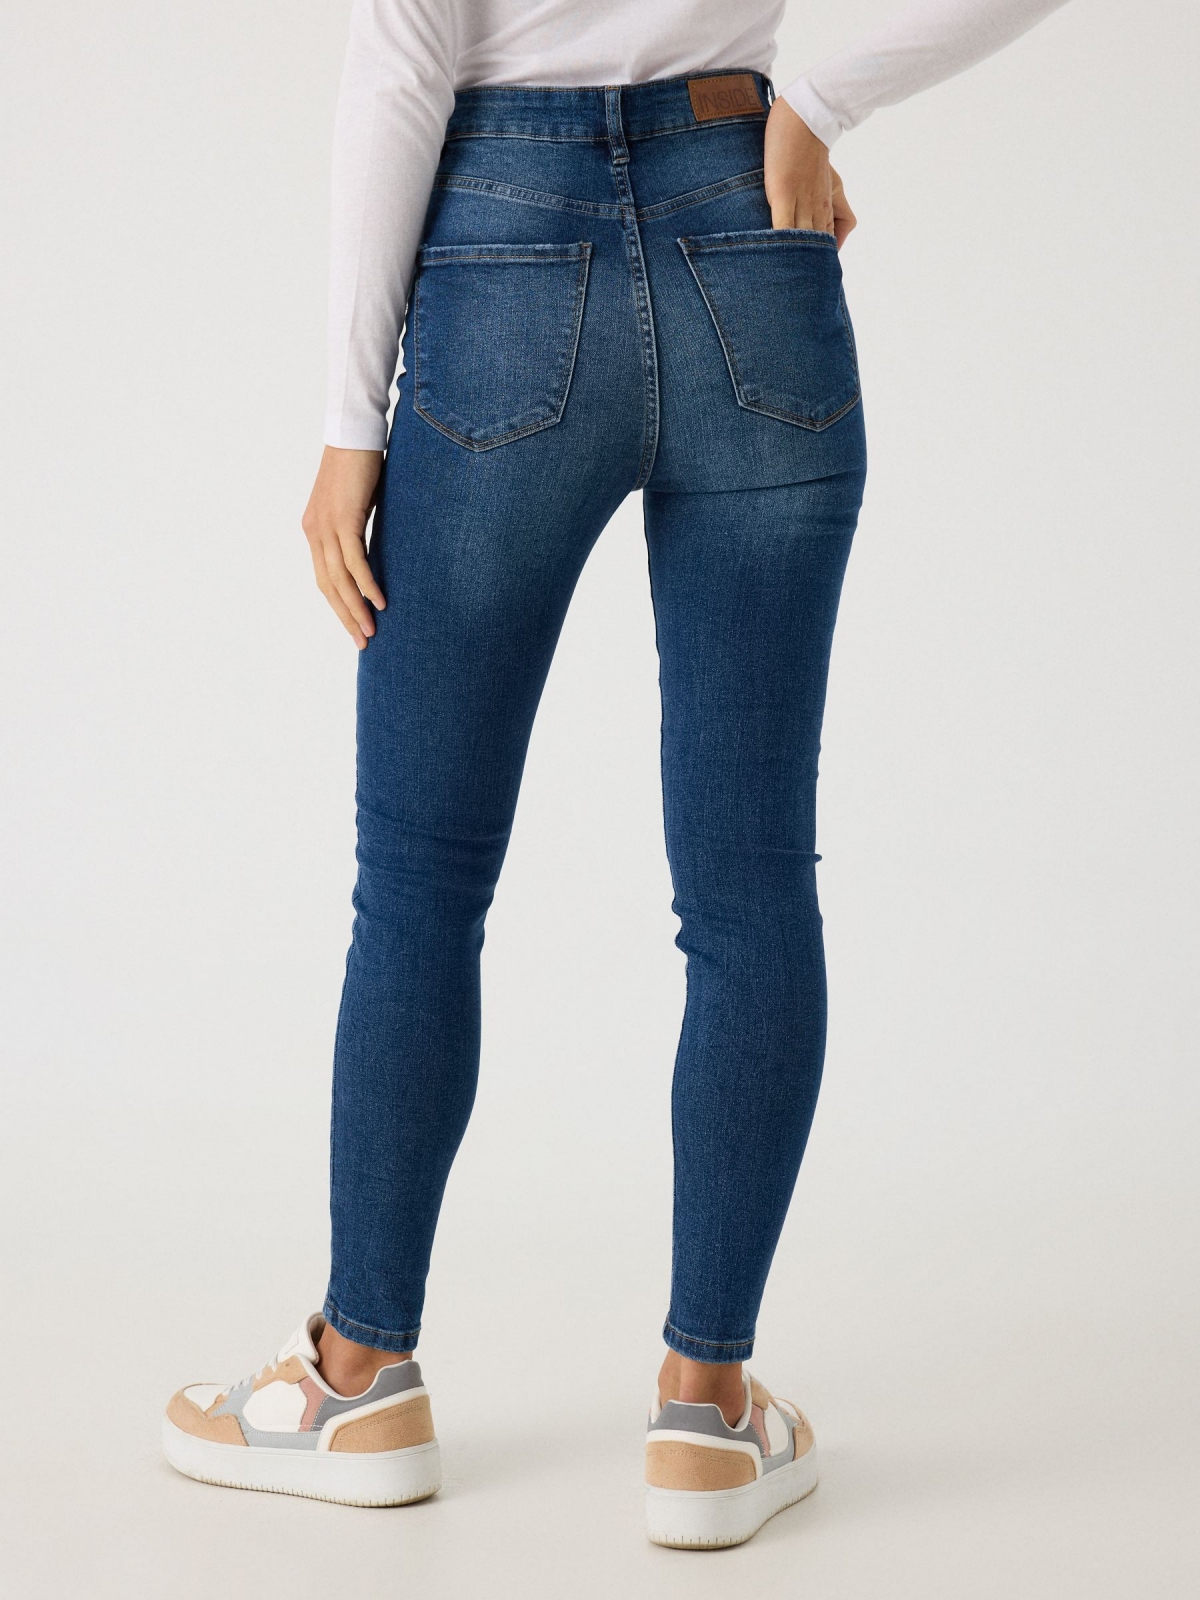 Blue high waisted five pocket skinny jeans blue middle back view